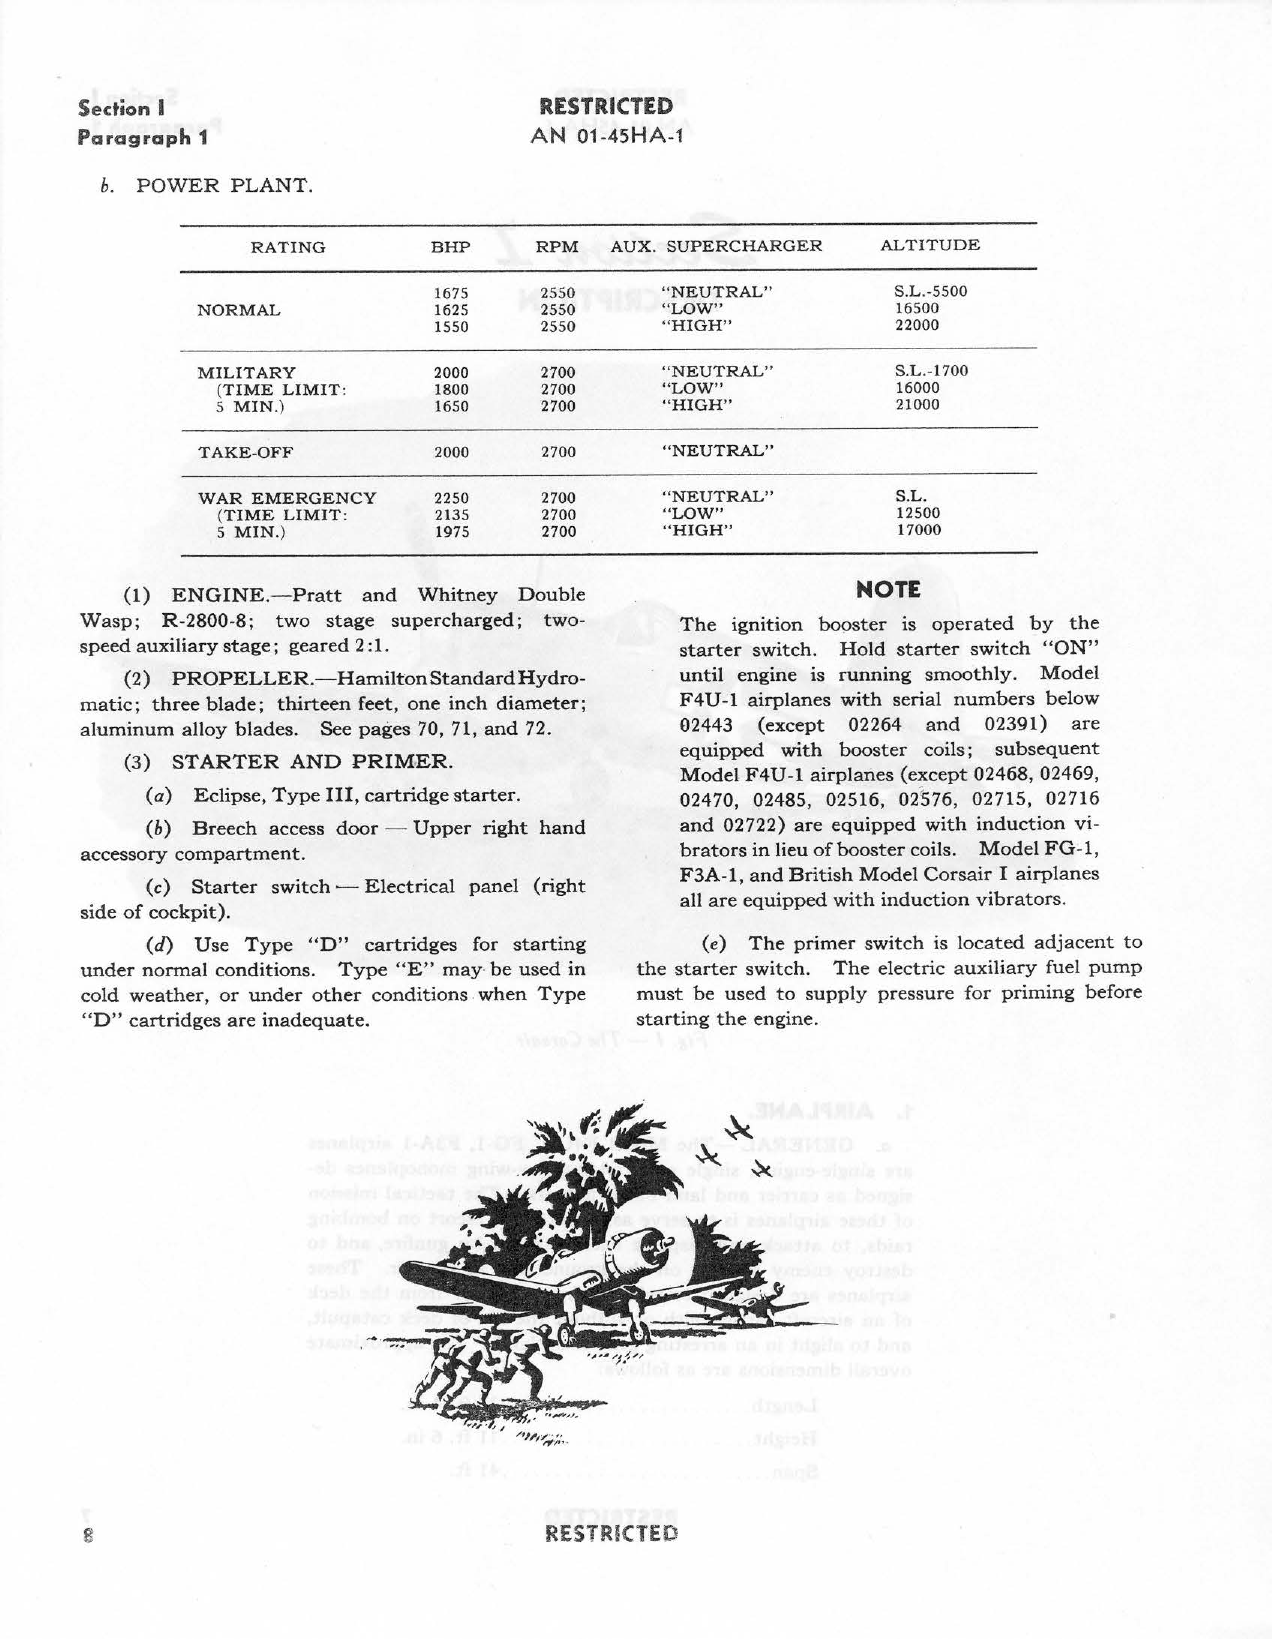 Sample page 9 from AirCorps Library document: Pilots Flight Operating Instructions for Corsair - Models F4U-1, F3A-1 and FG-1